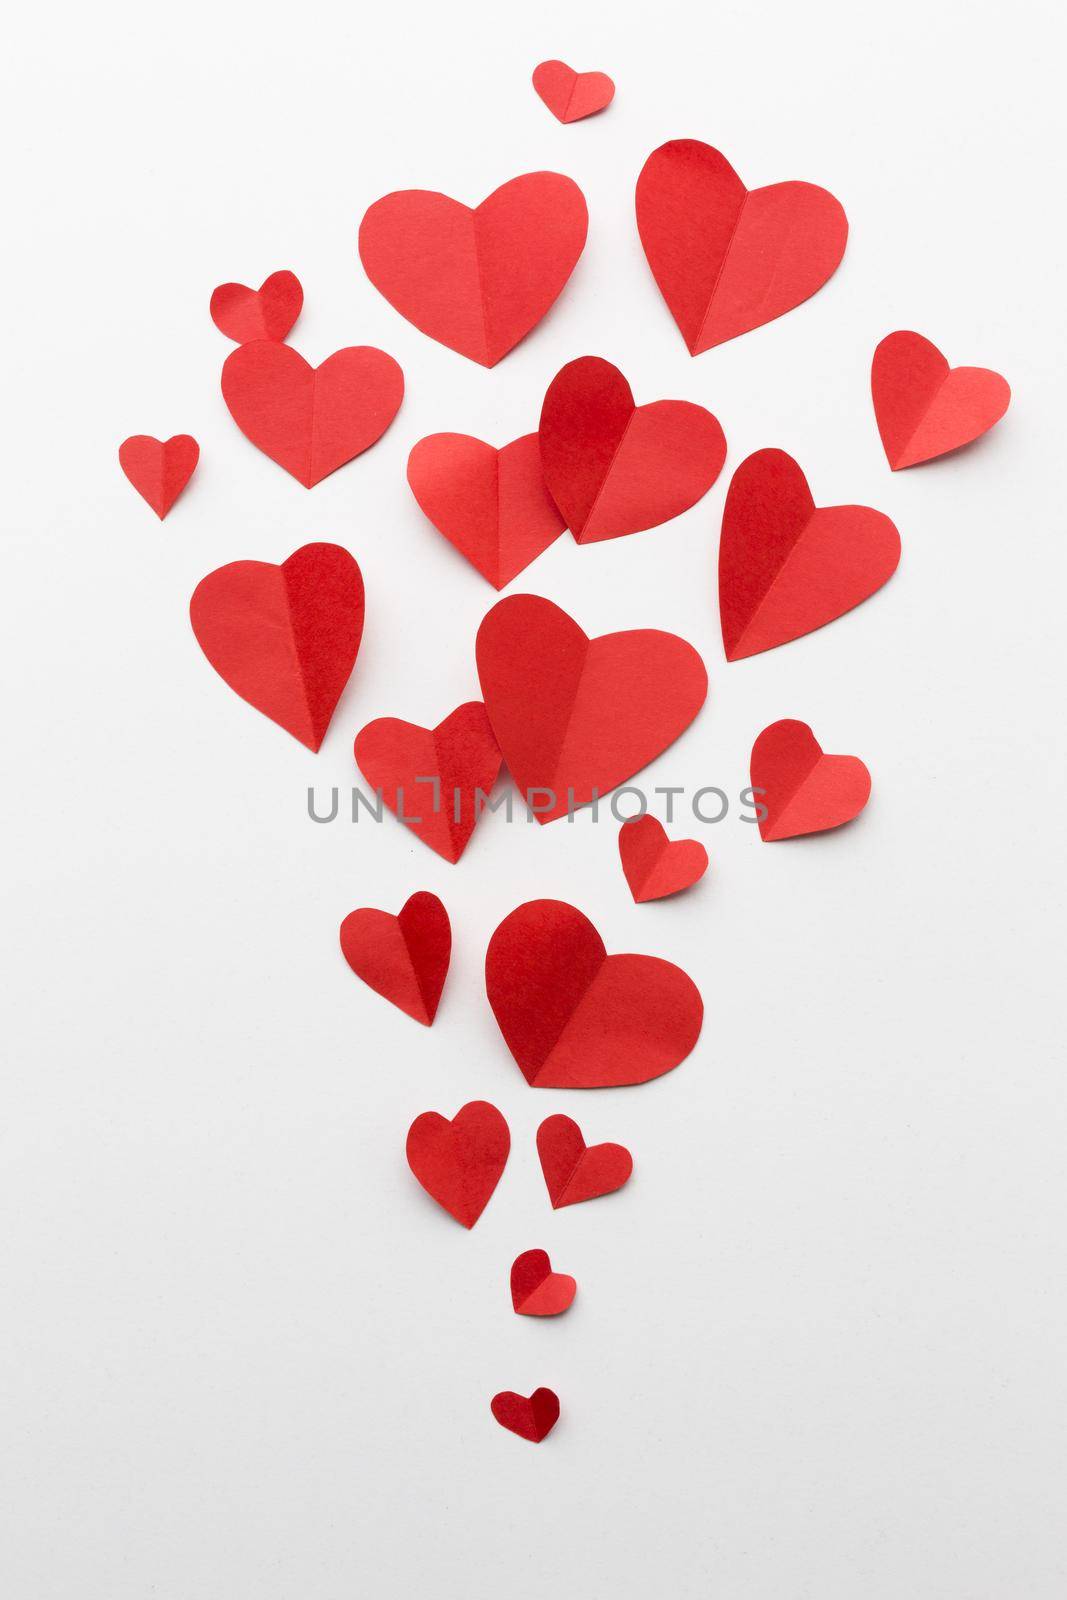 flat lay paper heart shapes valentines day by Zahard